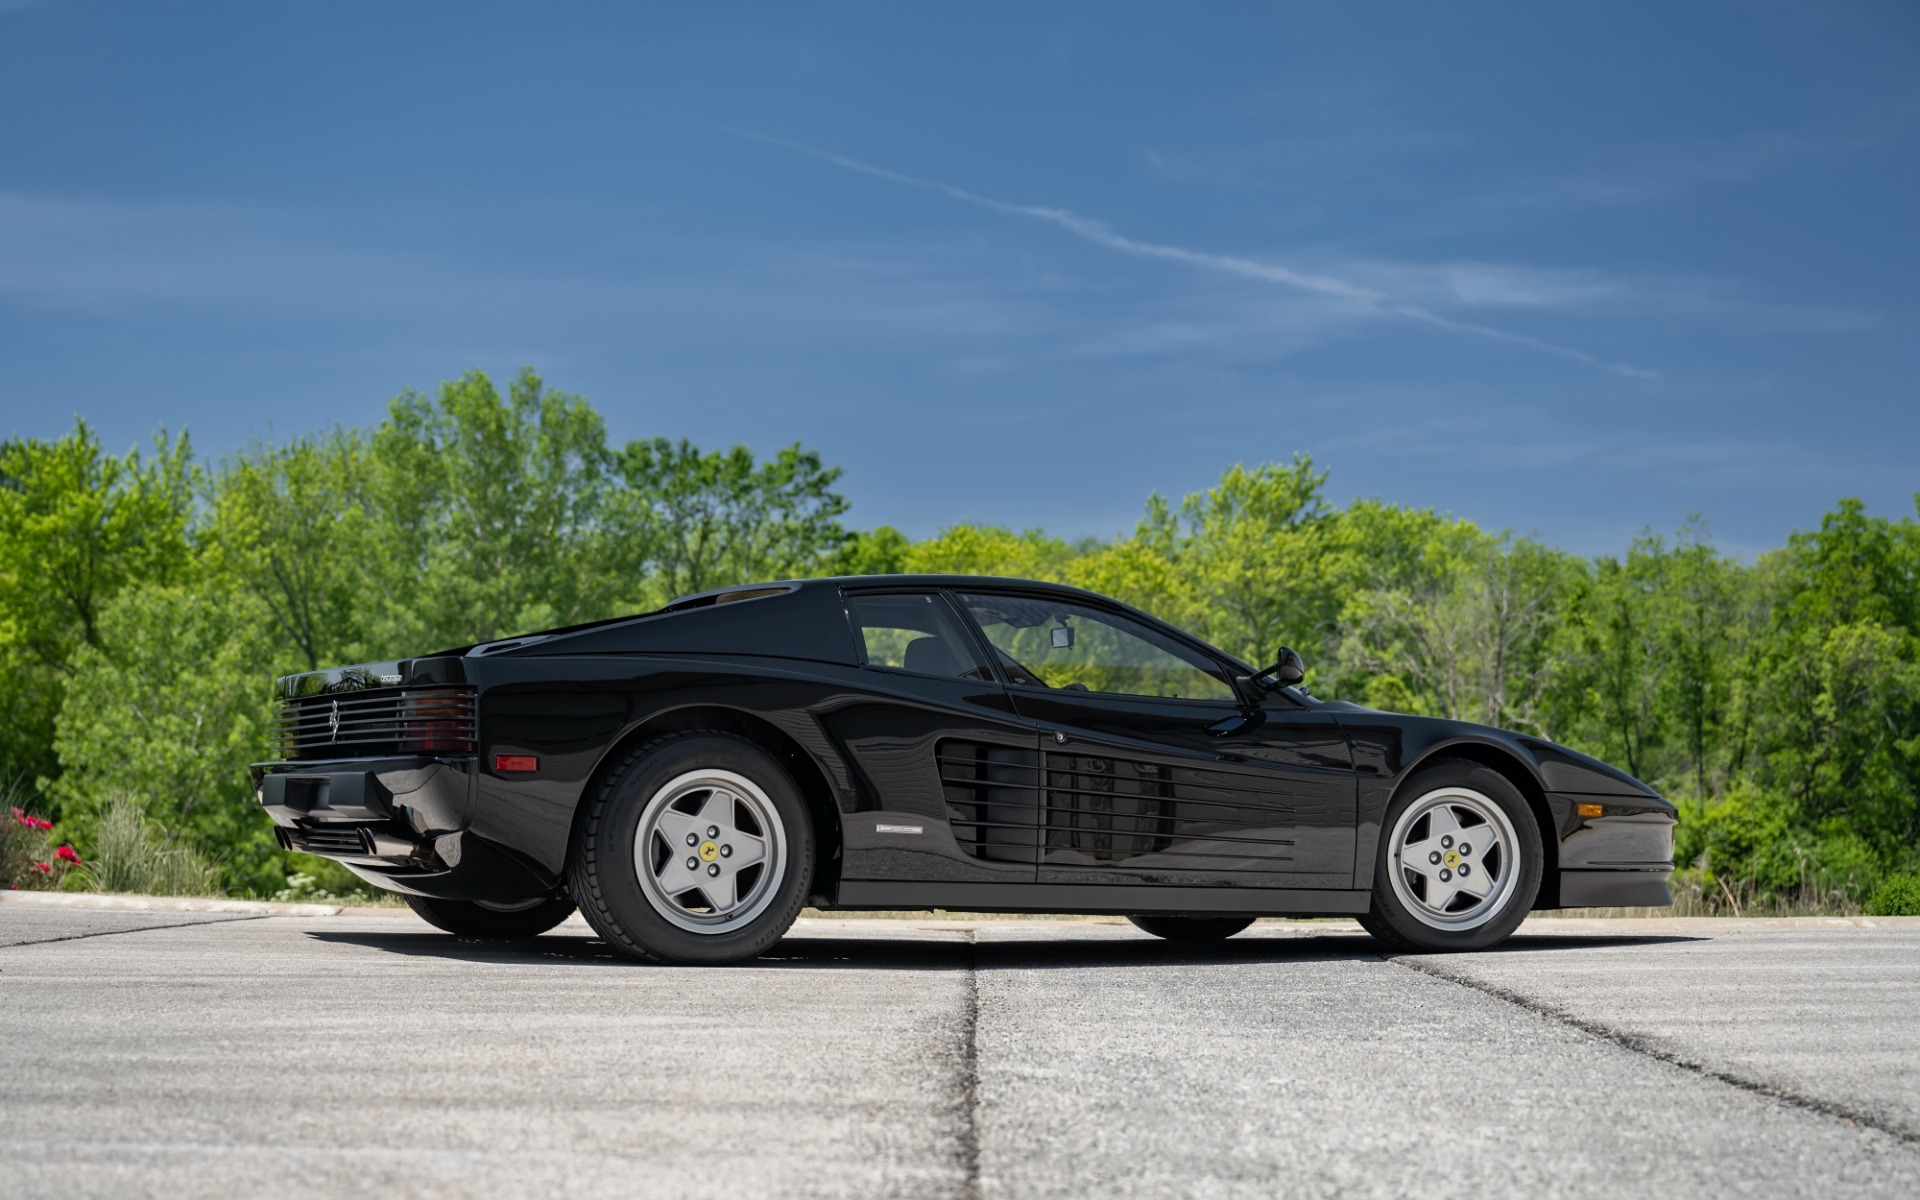 Used-1991-Ferrari-Testarossa-Coupe-ONLY-19k-Miles-RARE-Color-Combo-STUNNING-Condition-Serviced